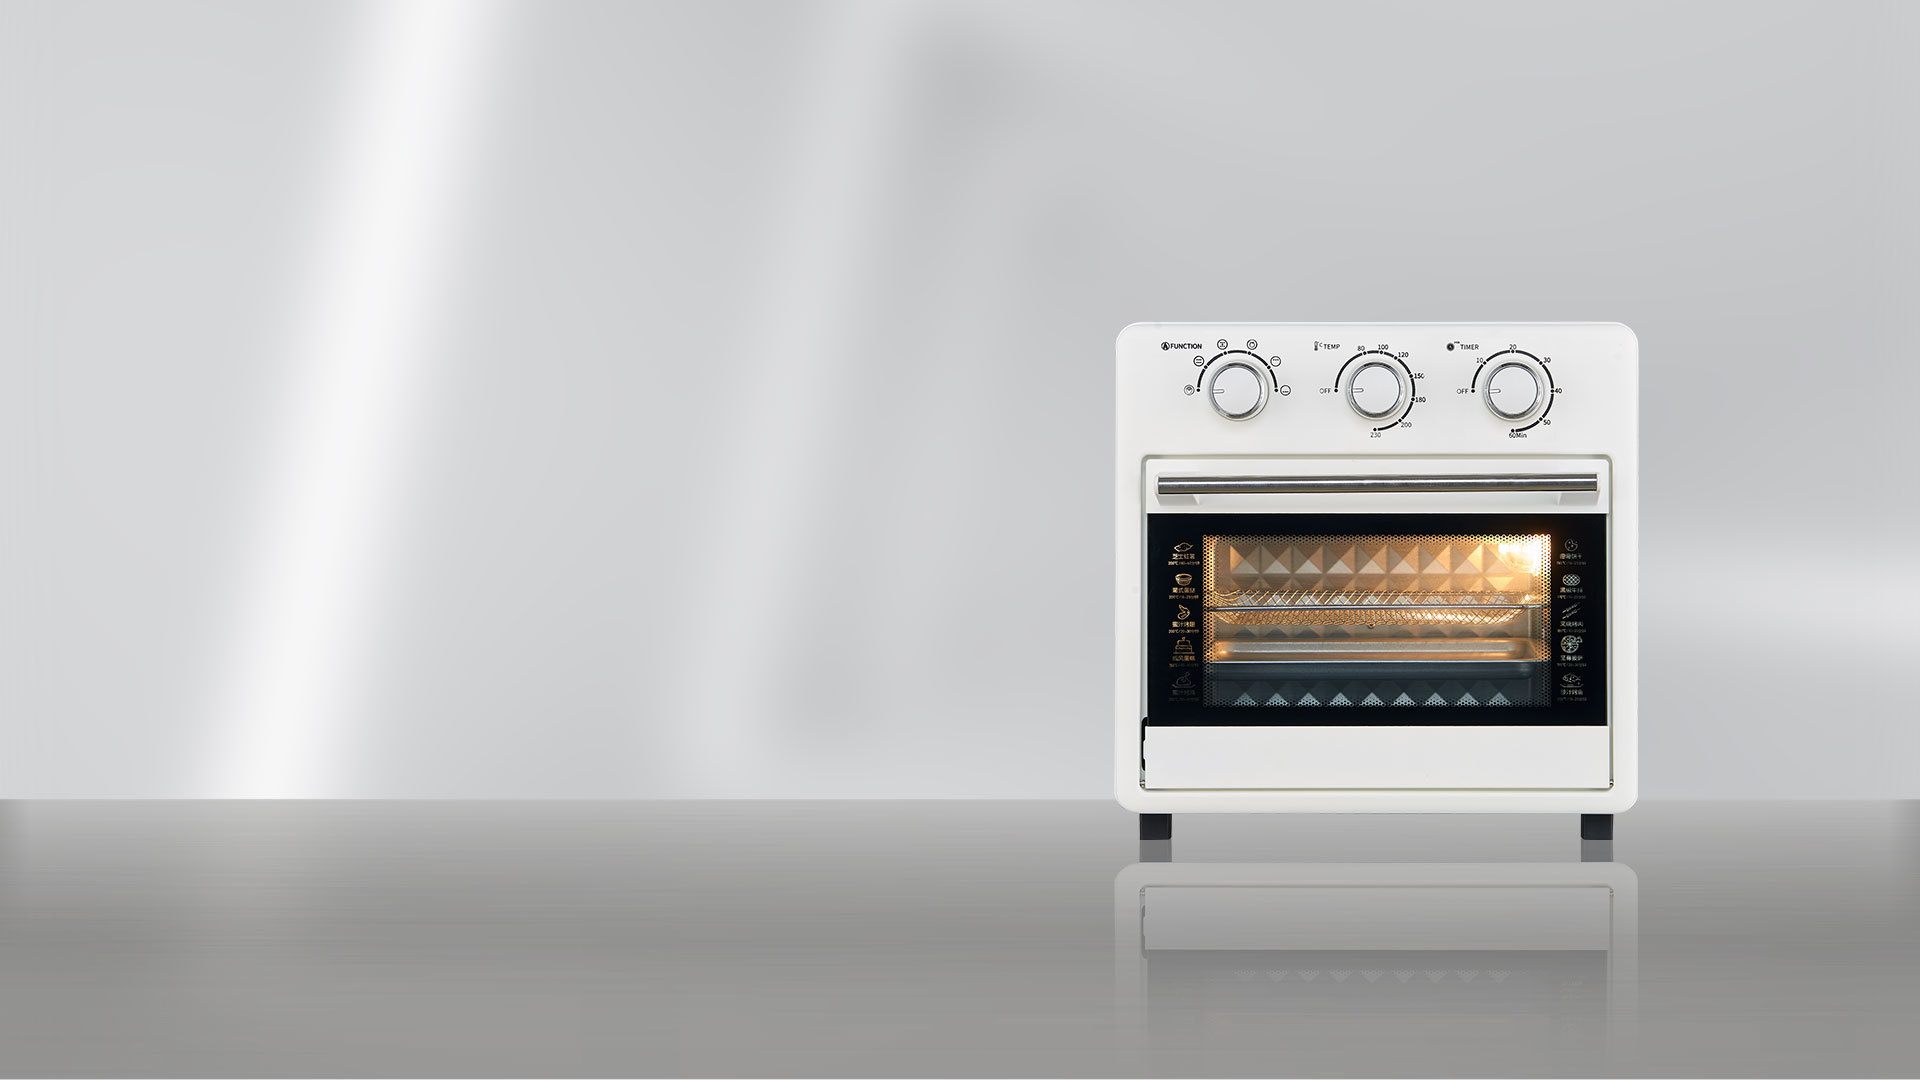 Professional development design and production of oven